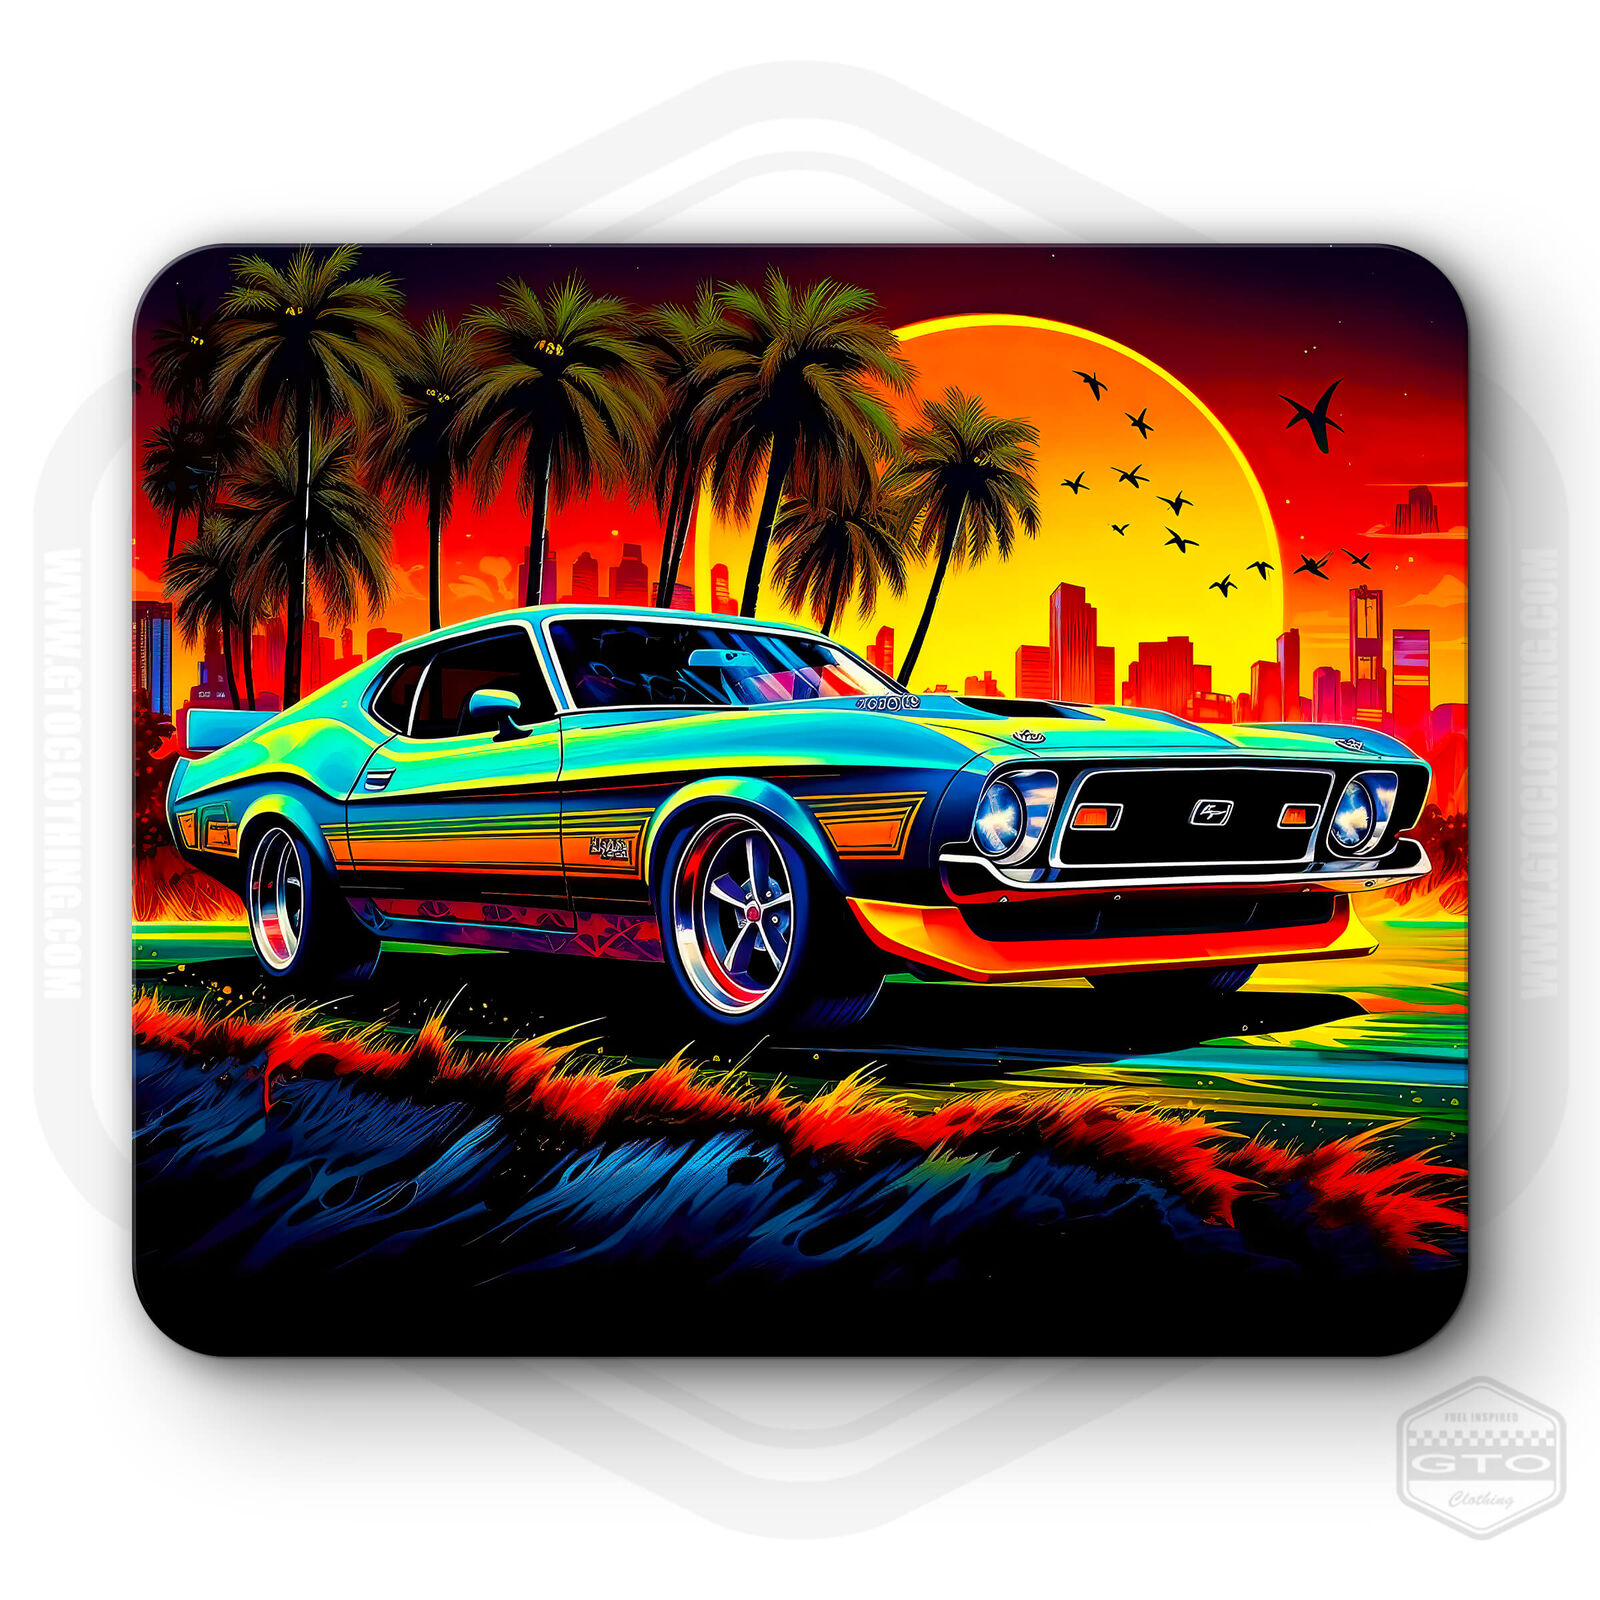 Ford Mustang Mach 1 American Classic Car Mouse Pad | Fan Art